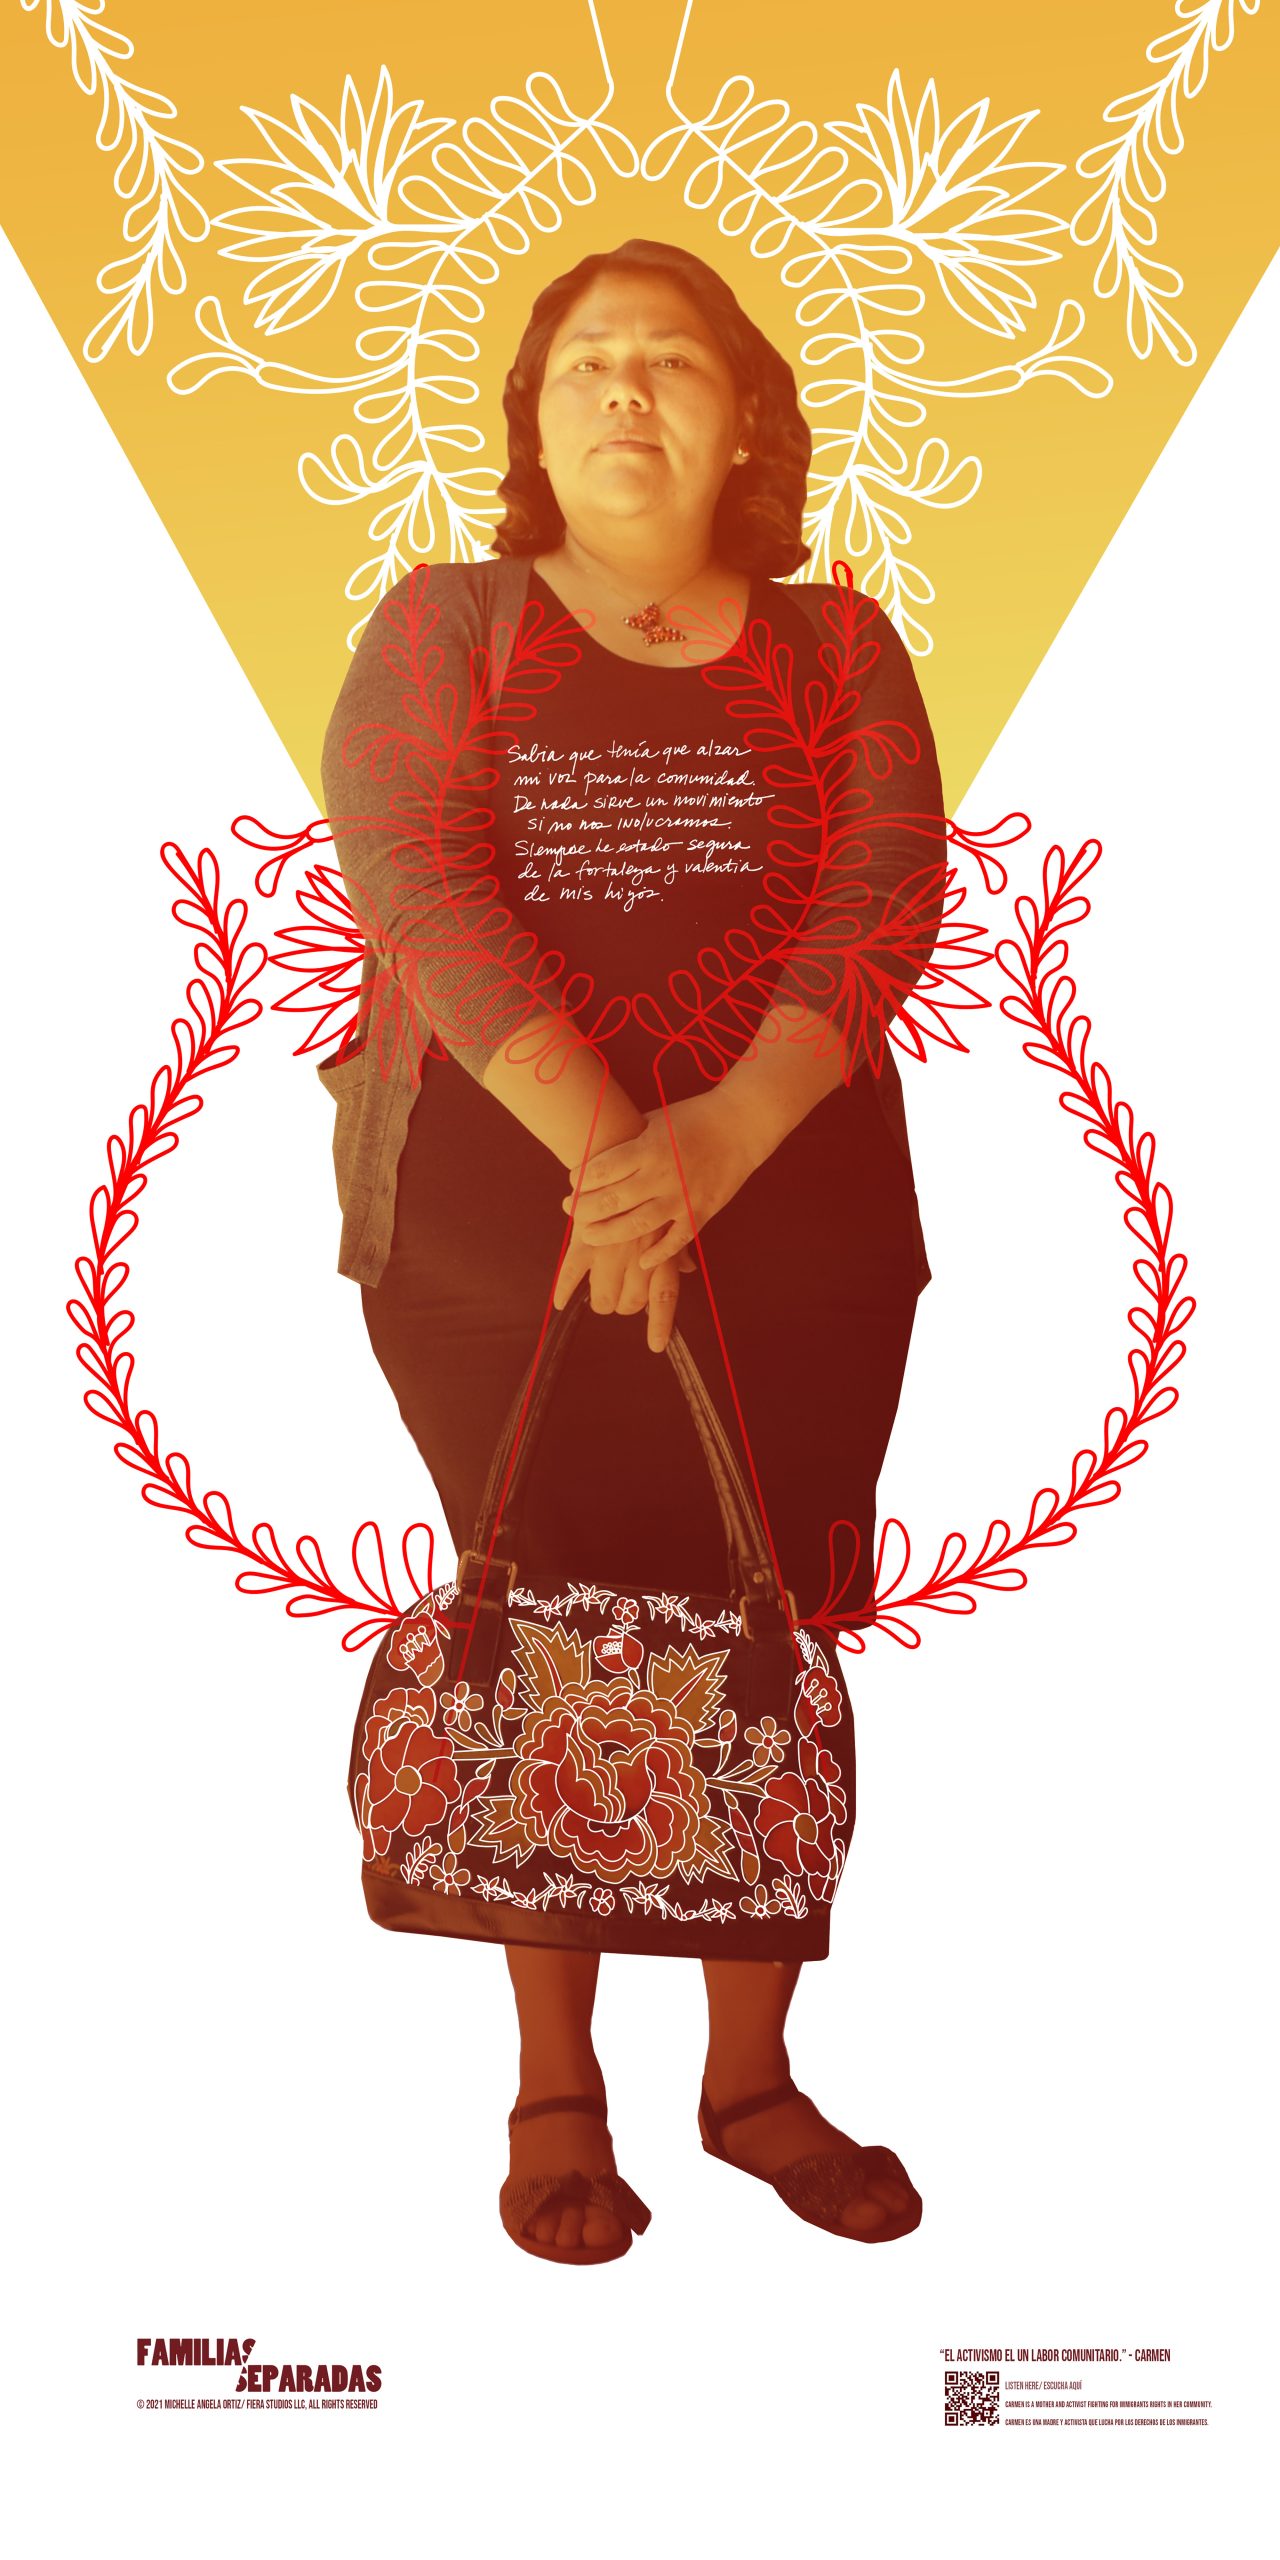 Poster: A poster of a portrait of Carmen Rodriguez Rios in a stance conveying strength, wearing a skirt and sweater, in front of a white background with a yellow triangle and a vine-like design twining and framing Carmen's image and her bright floral purse she holds in front of her. The logo for Familias Separadas appears in a lower corner. Video: Opening with the words Familias Separadas, in text that separates in two directions, a video shows Carmen Rodriguez Rios, a Latina woman with brown hair, against a gray wall, filmed from close up as she gives an oral account, with a courageous expression on her face, of her participation in public protest against an anti-immigrant bill in North Carolina. With subtitles translating Spanish to English.